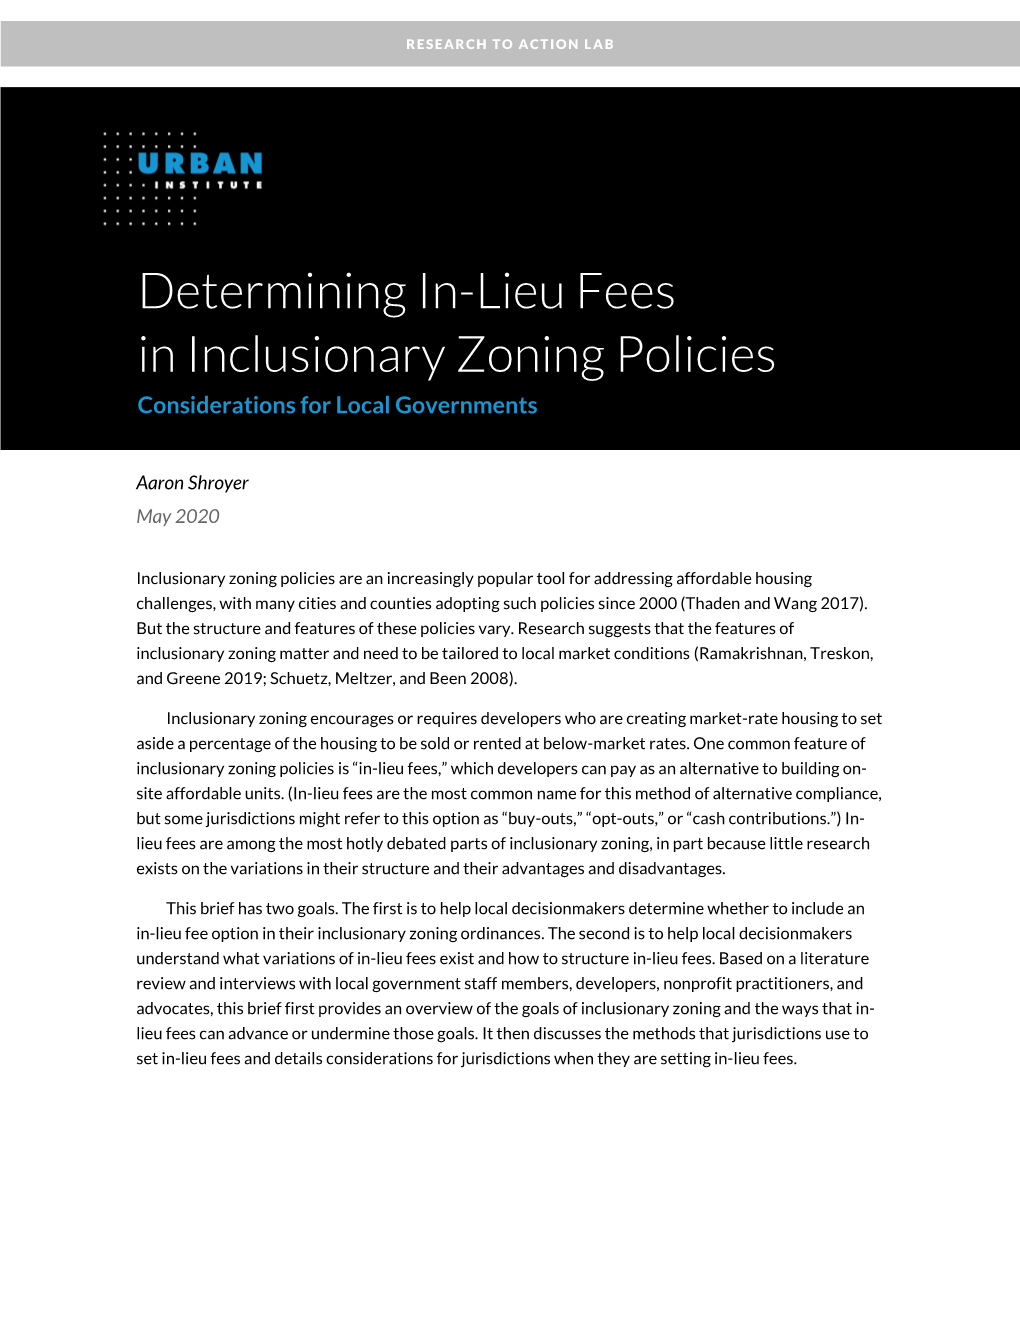 Determining In-Lieu Fees in Inclusionary Zoning Policies Considerations for Local Governments